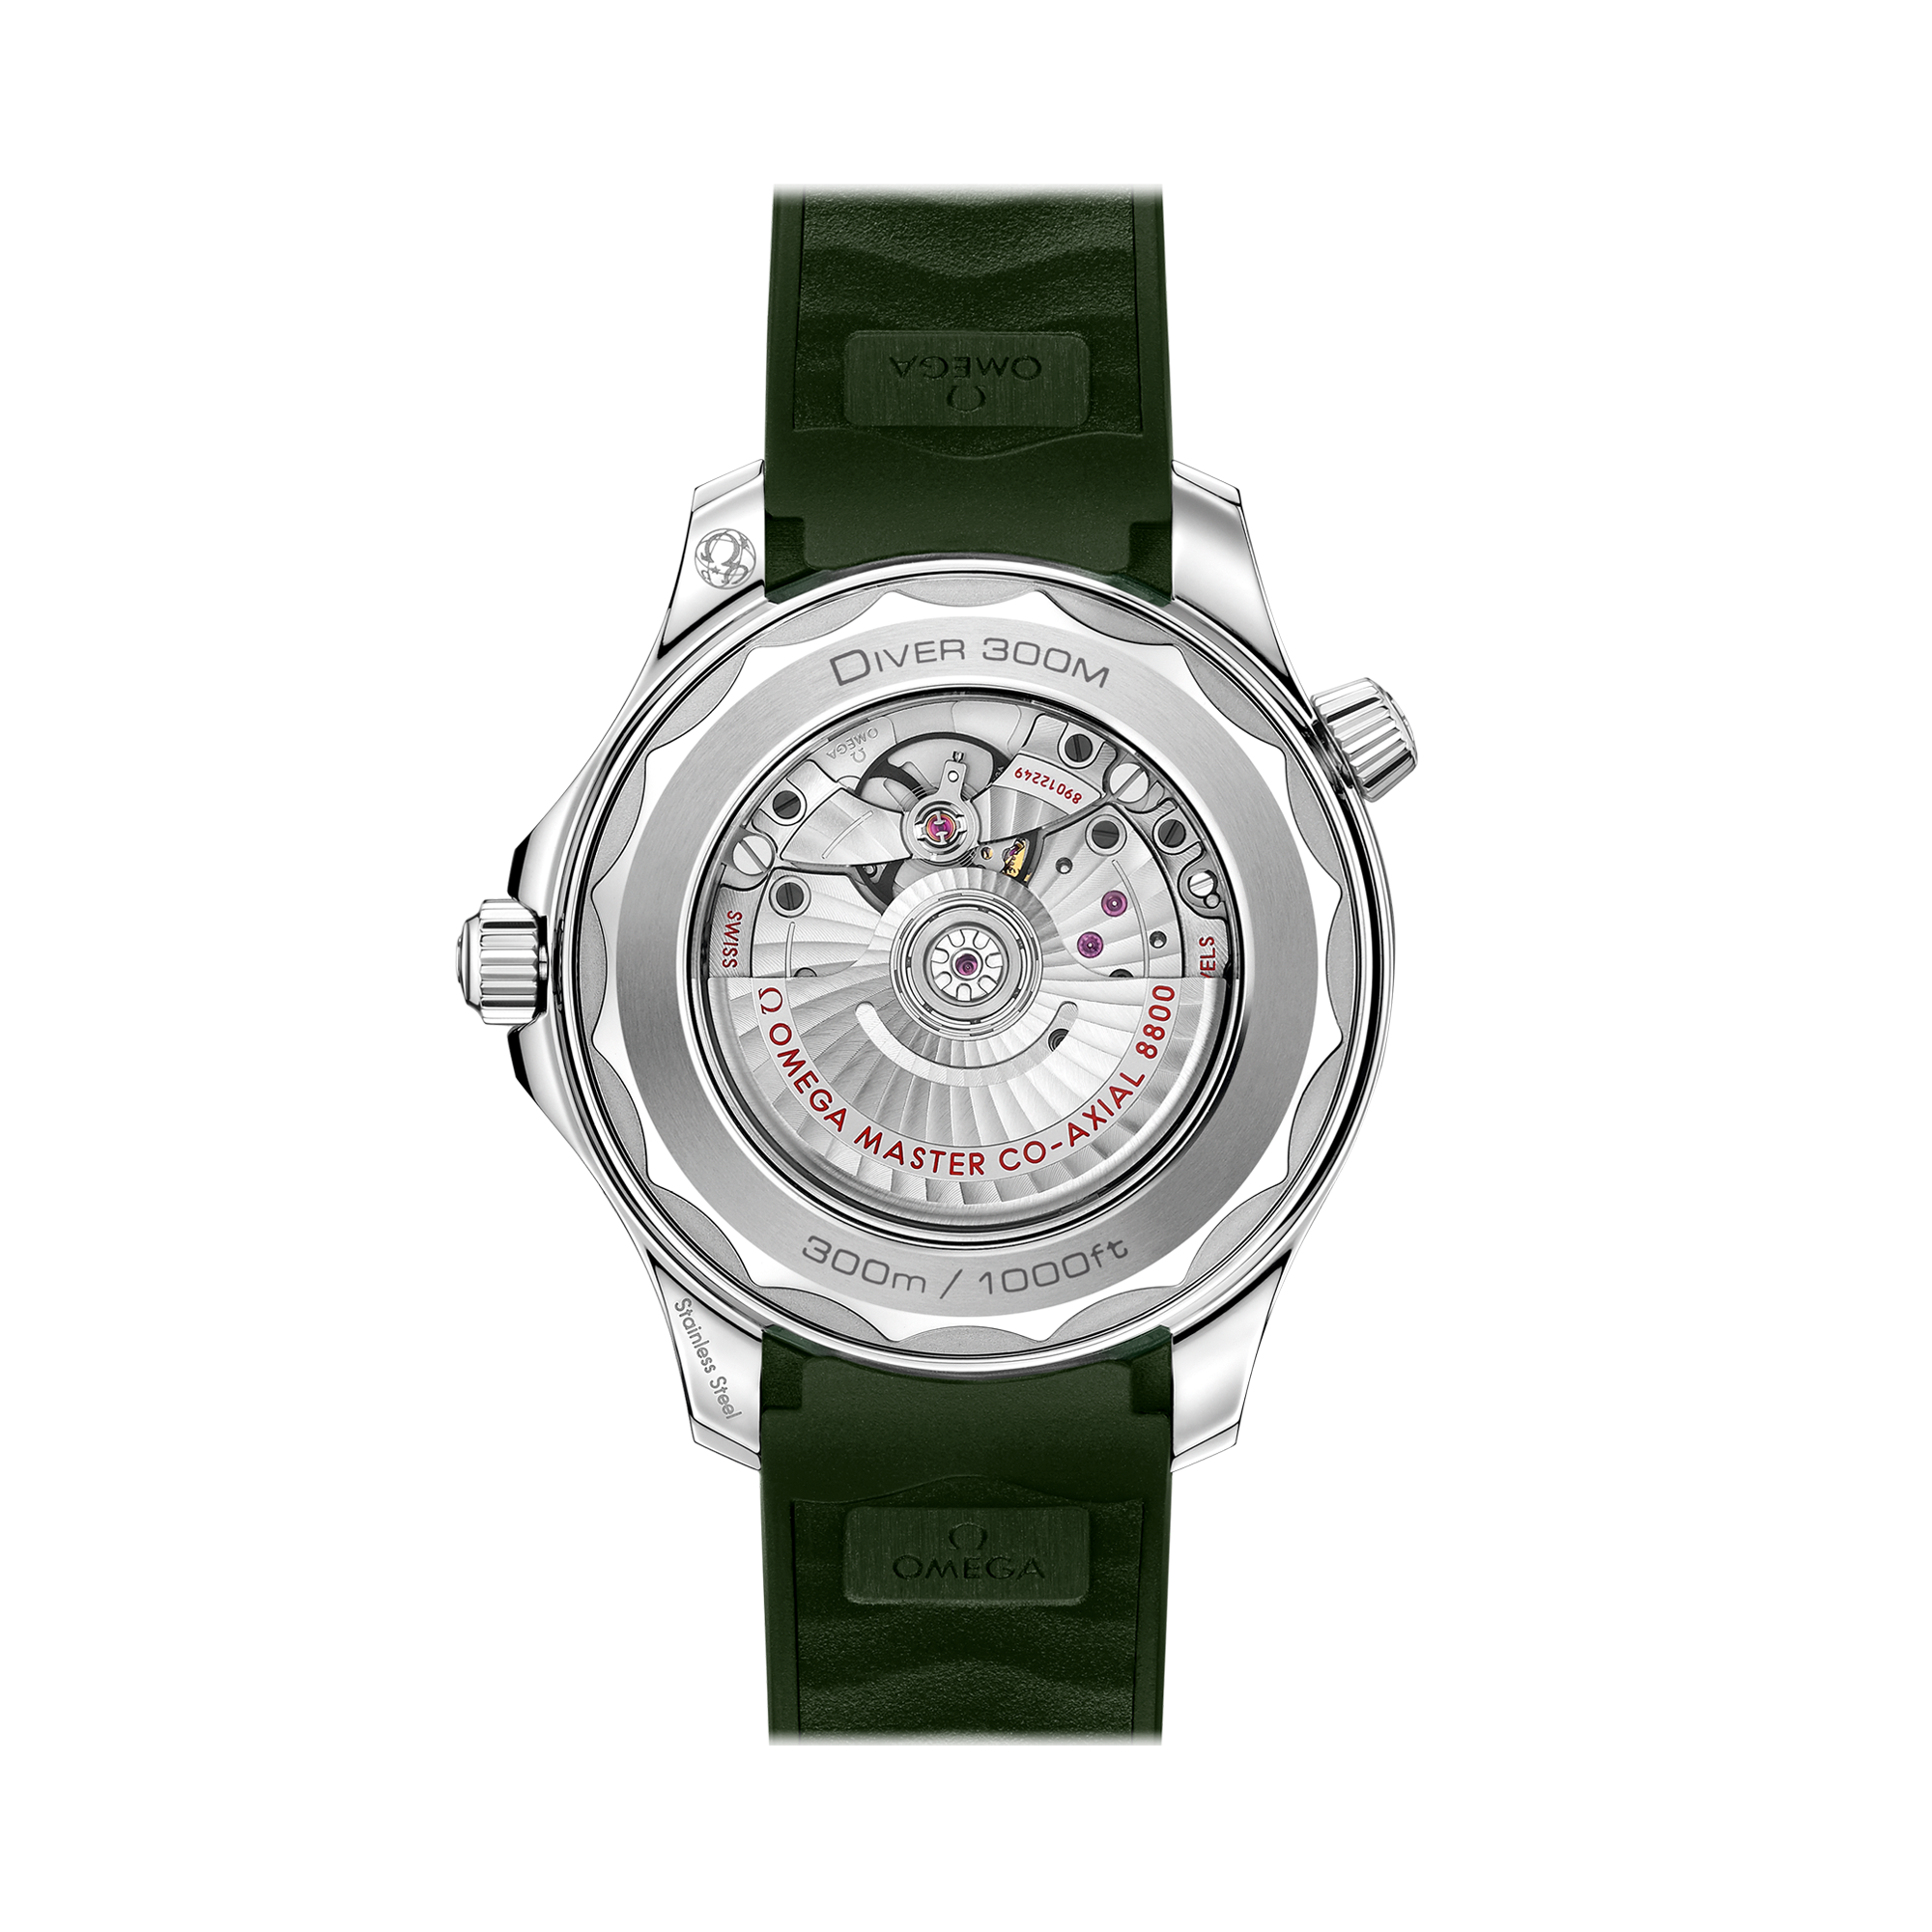 OMEGA Seamaster Diver 300m 42mm, Green Dial, Dot Numerals_2